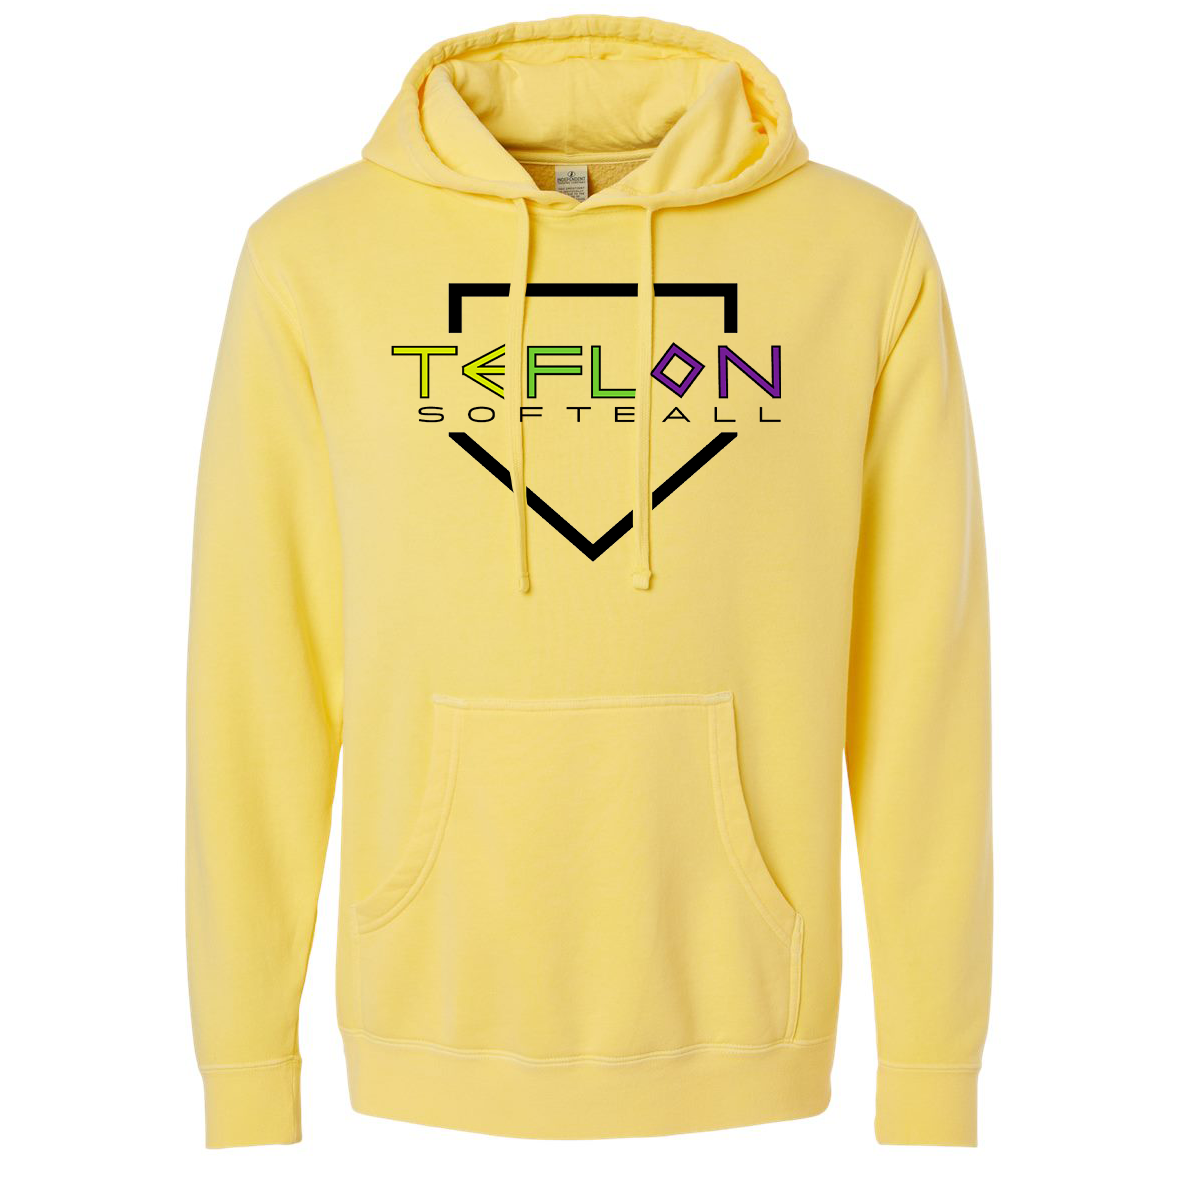 Team Teflon Softball Independent Trading Co. Pigment-Dyed Hooded Sweatshirt